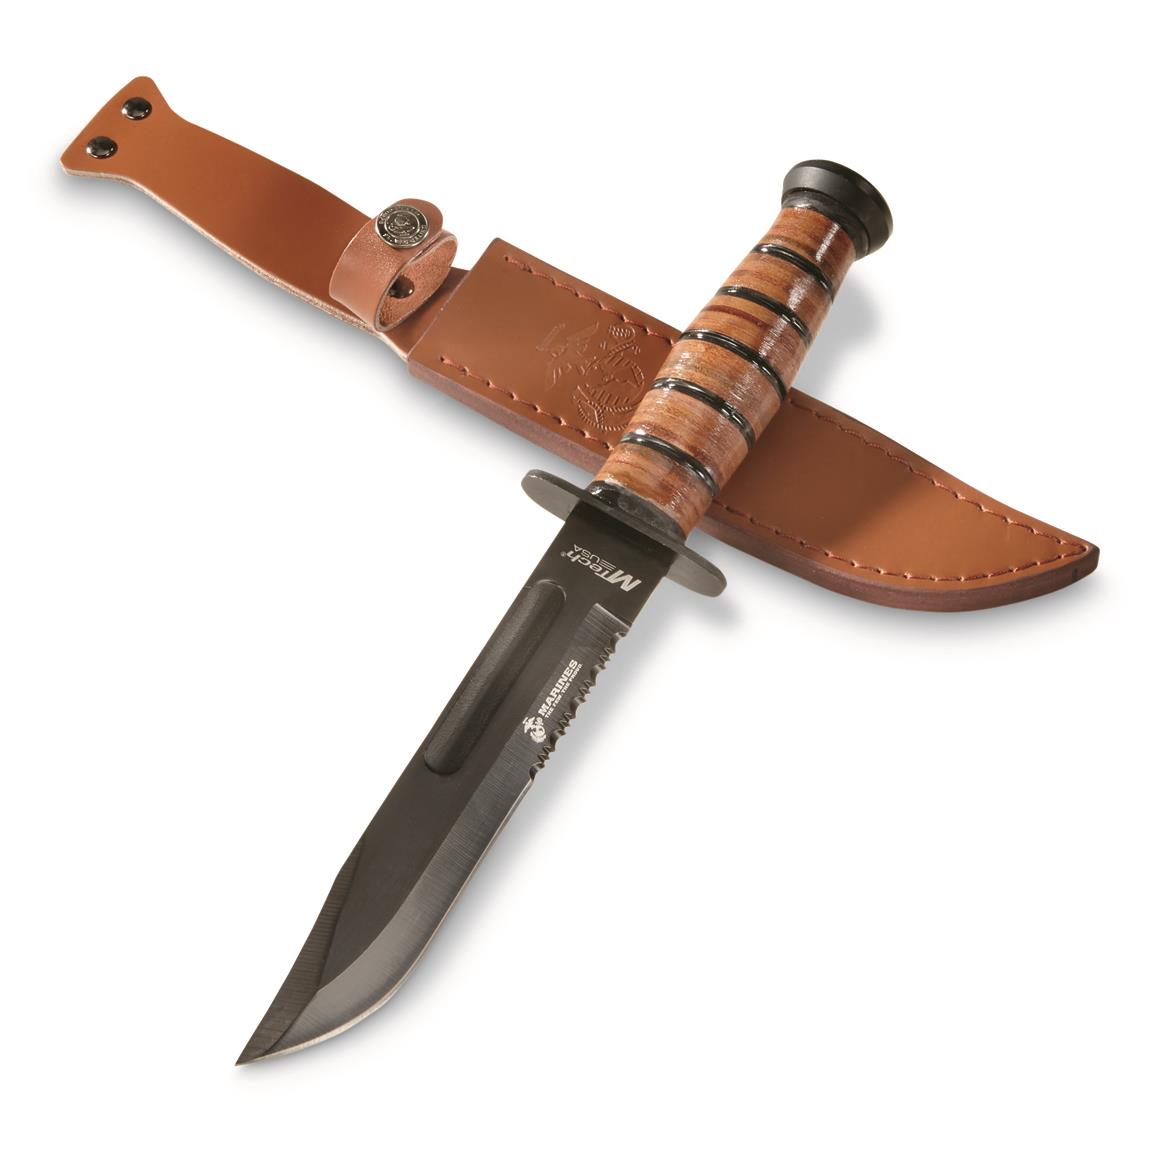 U.S. Marines by MTech MT-122MR Fixed Blade with Leather Handle, Brown